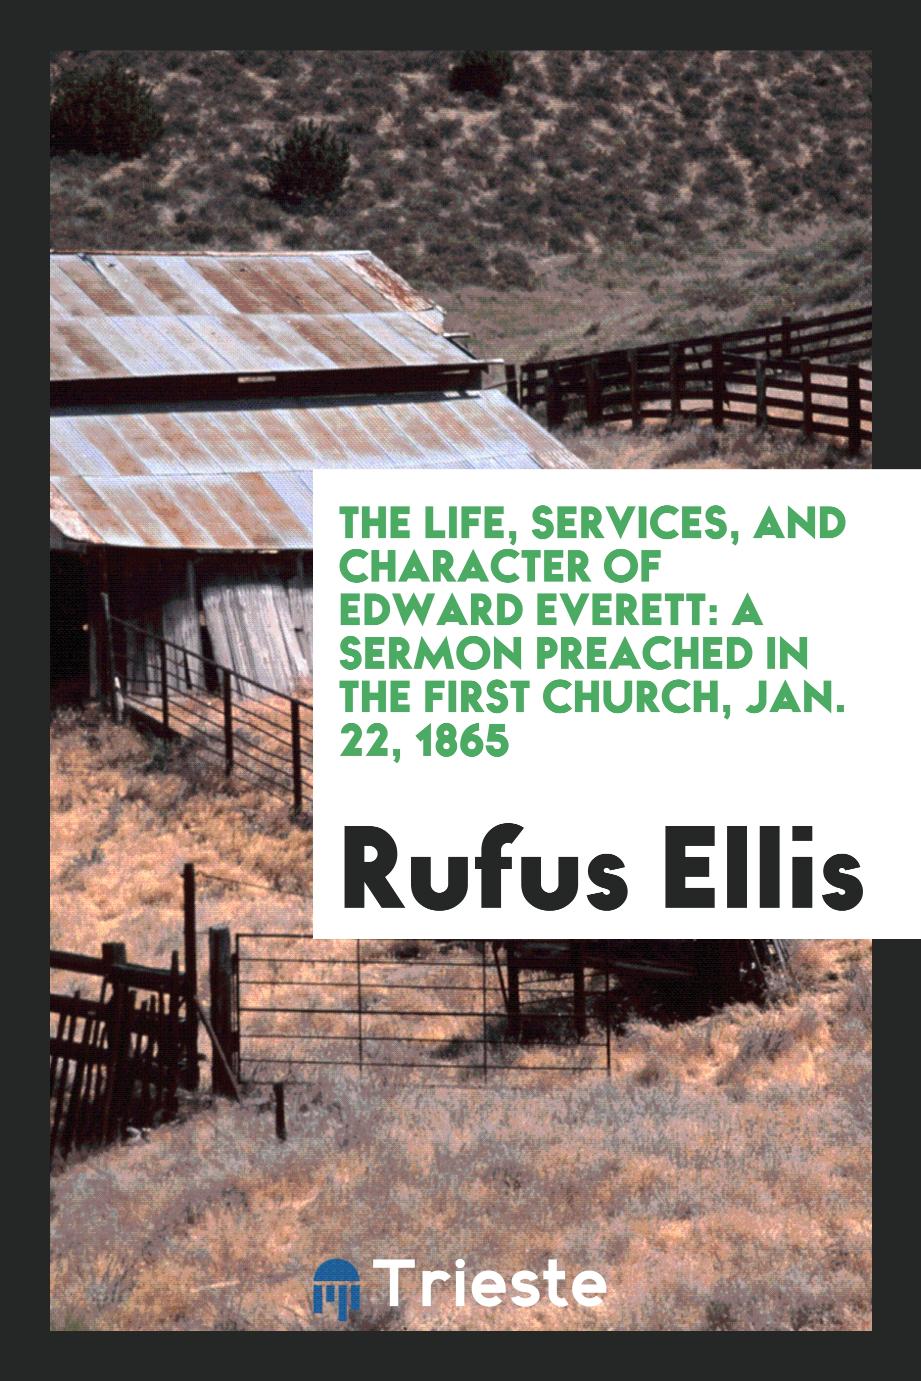 The Life, Services, and Character of Edward Everett: A Sermon Preached in the First Church, Jan. 22, 1865